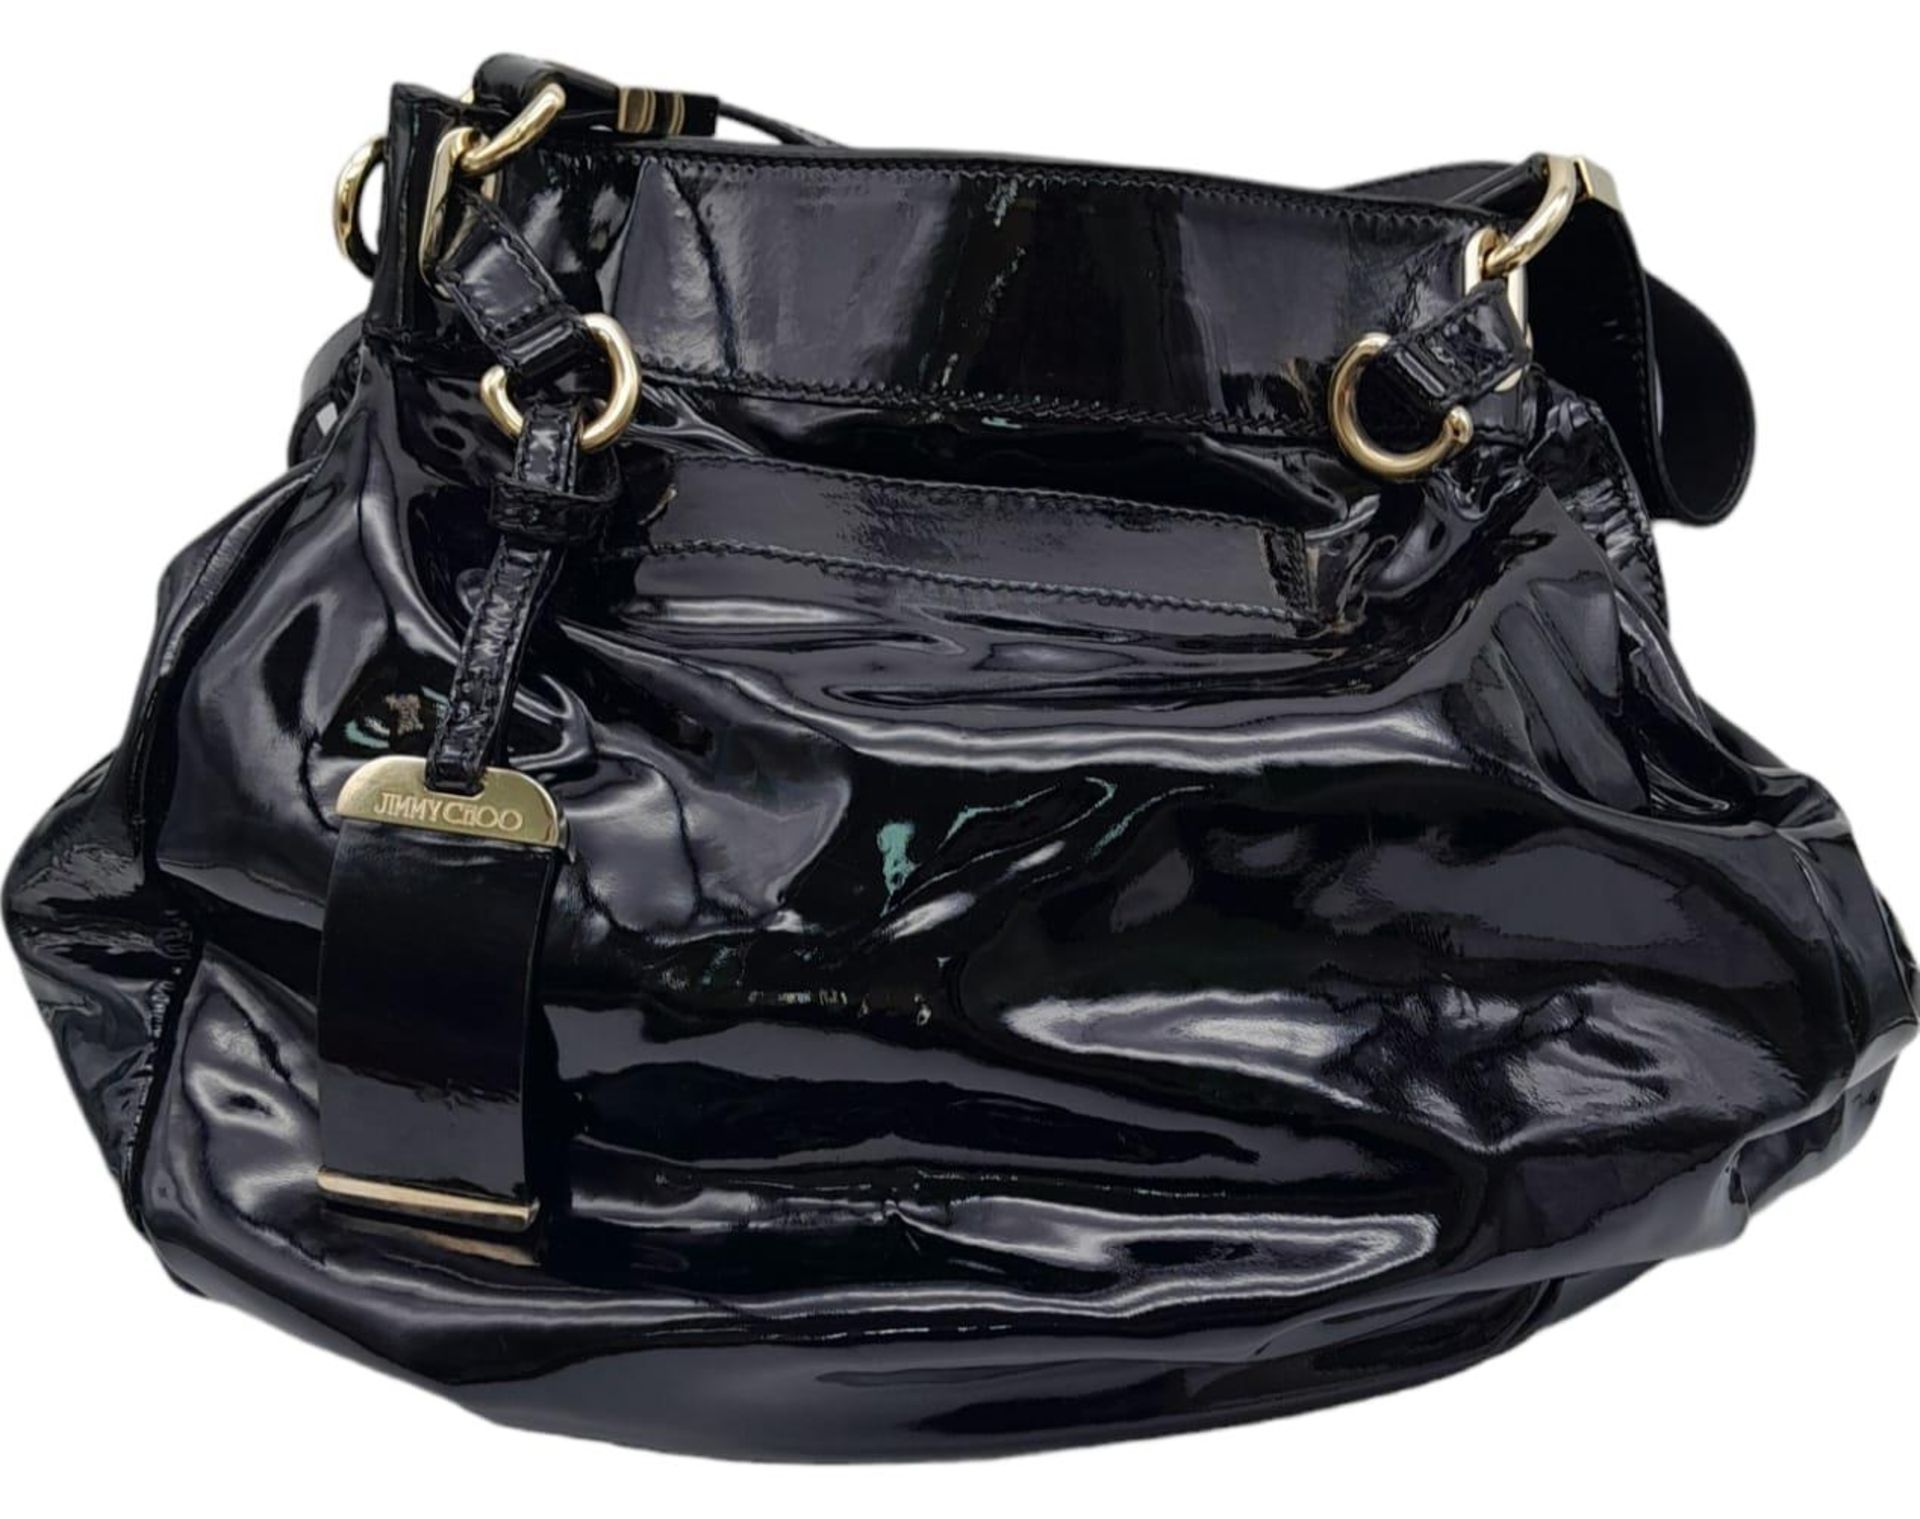 Jimmy Choo Black Patent Leather Handbag. Gorgeous feel to this handbag. Double strapped, with - Bild 2 aus 11